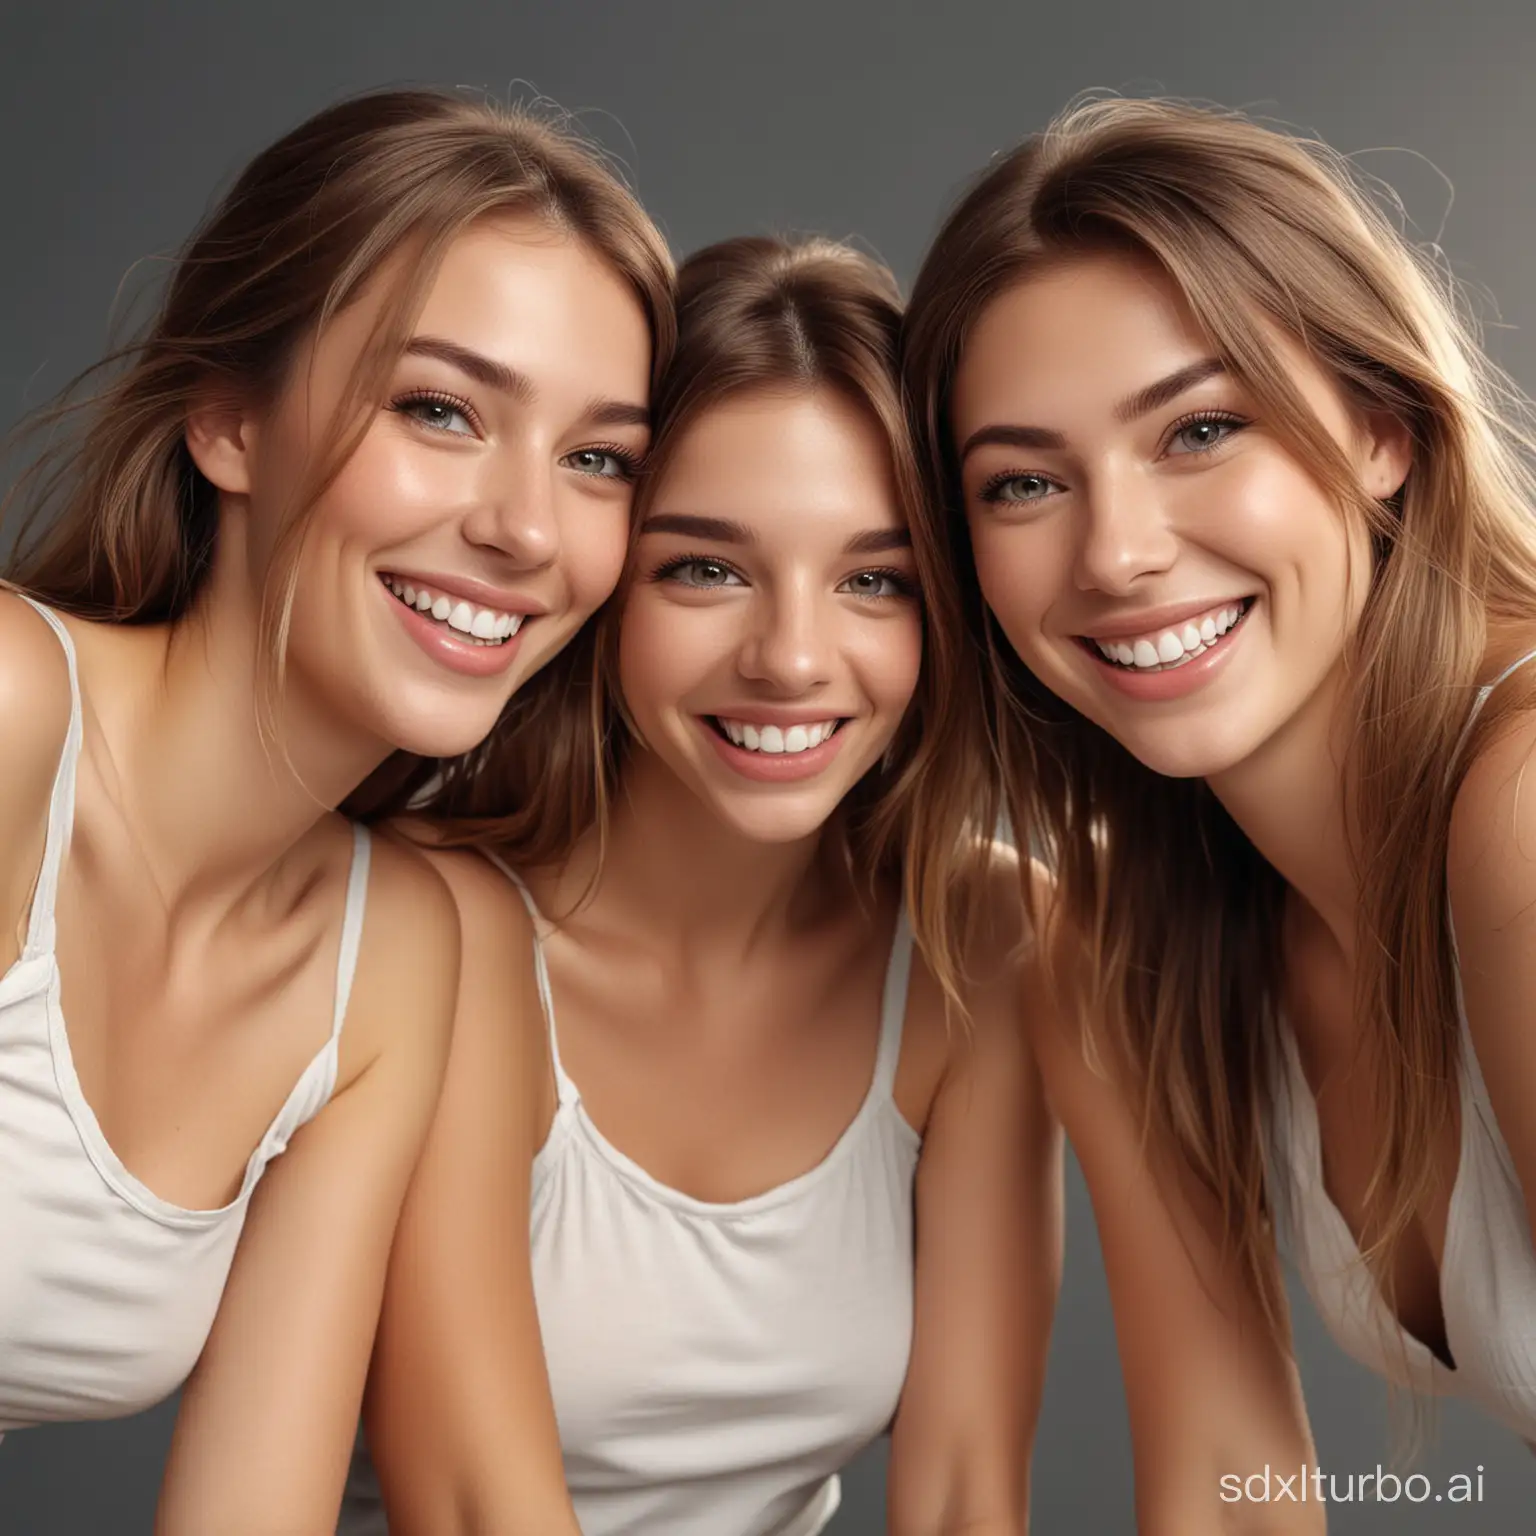 Joyful-Young-Women-Smiling-and-Laughing-Together